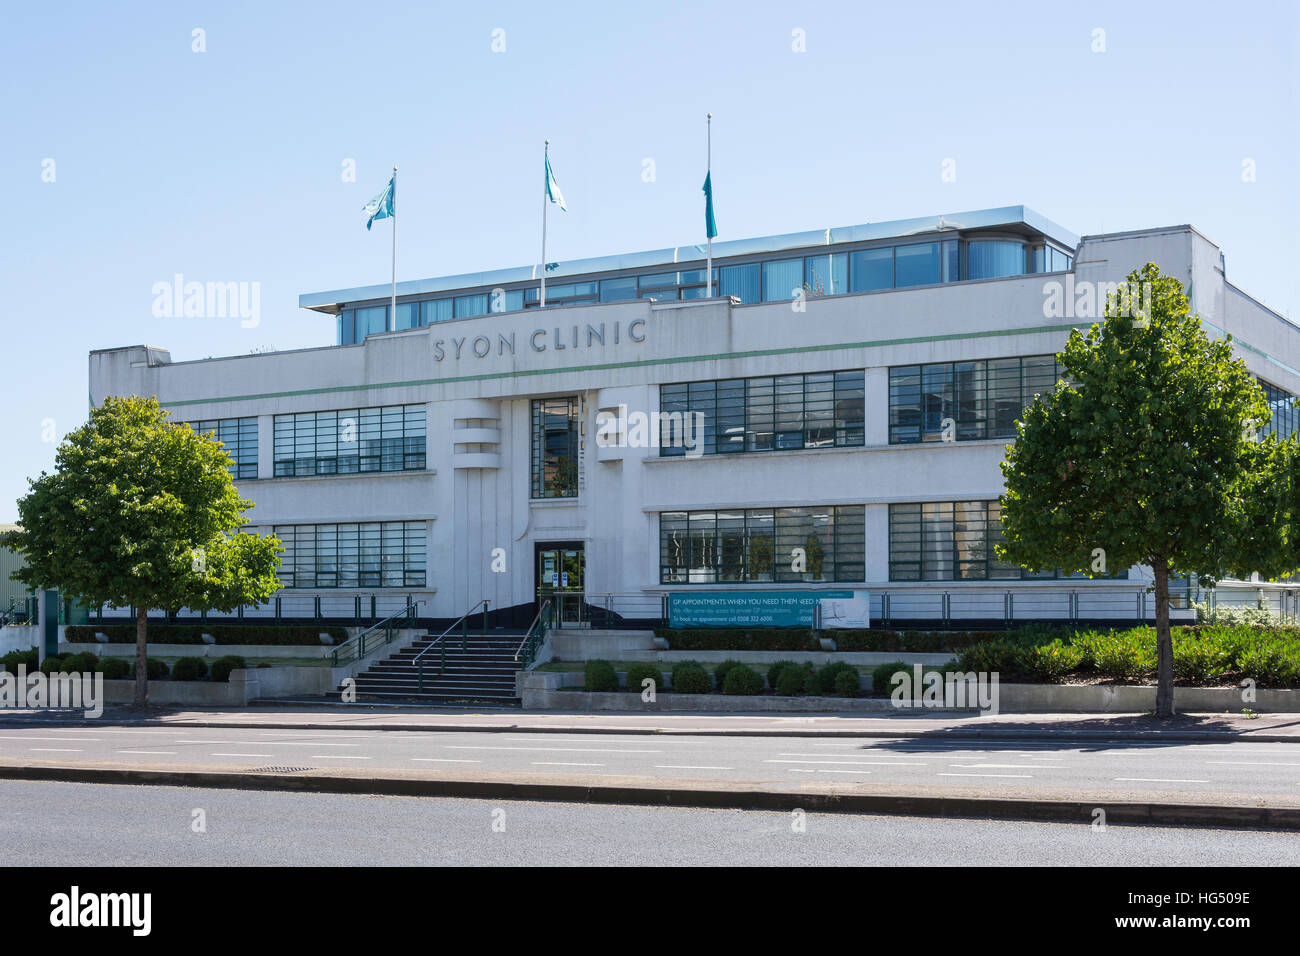 Art Deco Syon Clinic building, Great West Road, Brentford, London Borough of Hounslow, Greater London, England, United Kingdom Stock Photo